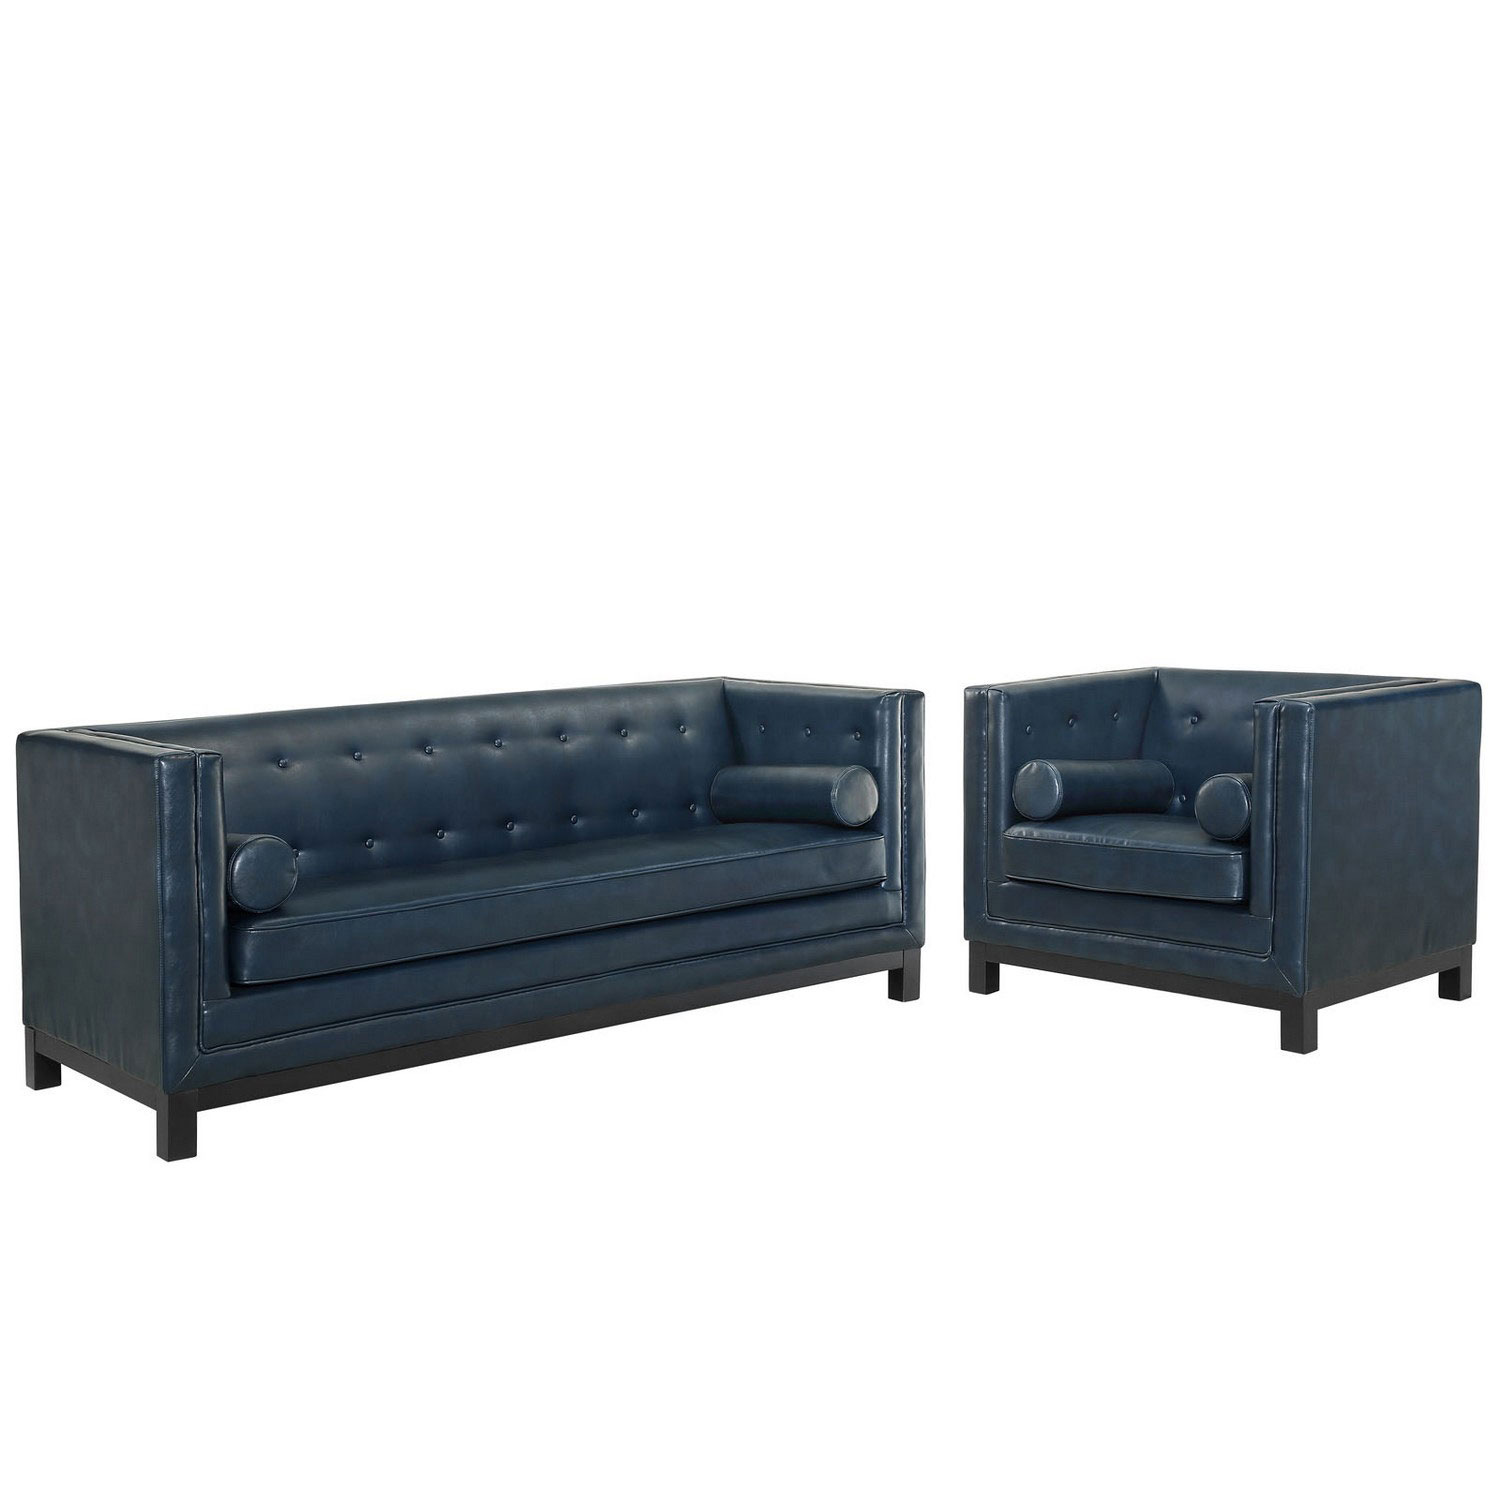 Modway Imperial 2 Piece Living Room Set - Blue